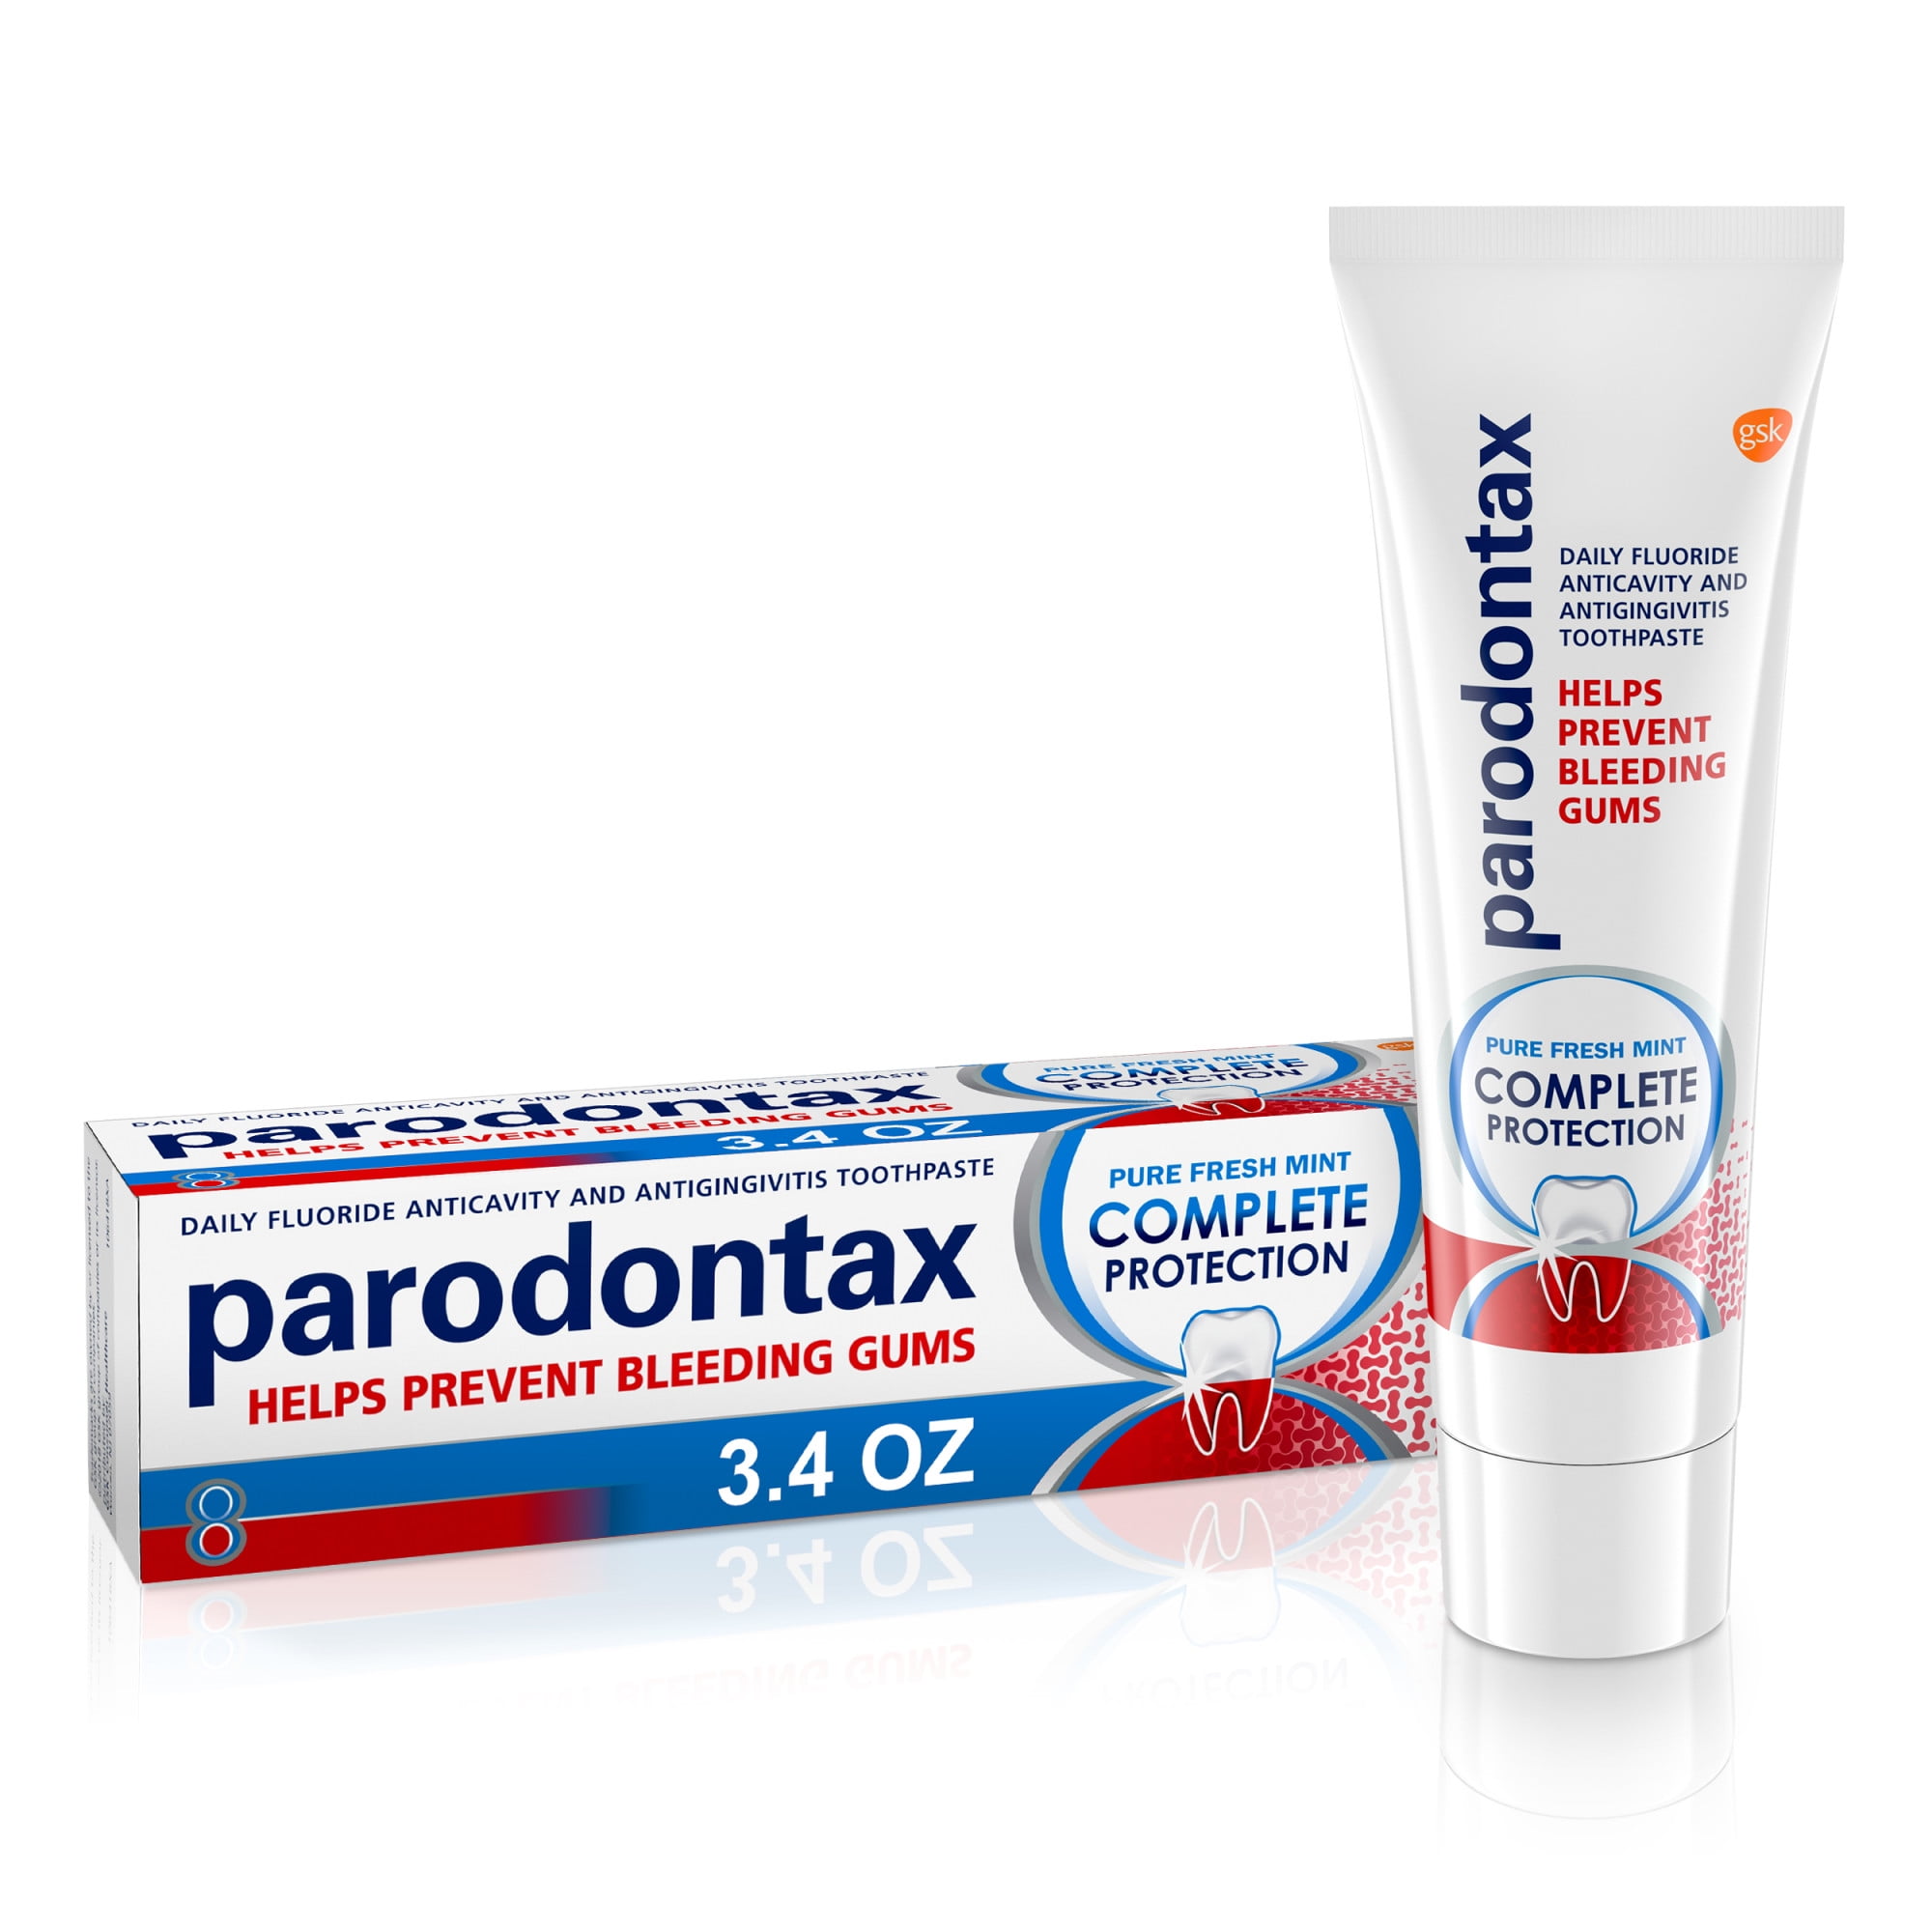 Parodontax Complete Protection Toothpaste, Pure Fresh Mint, 3.4 Oz